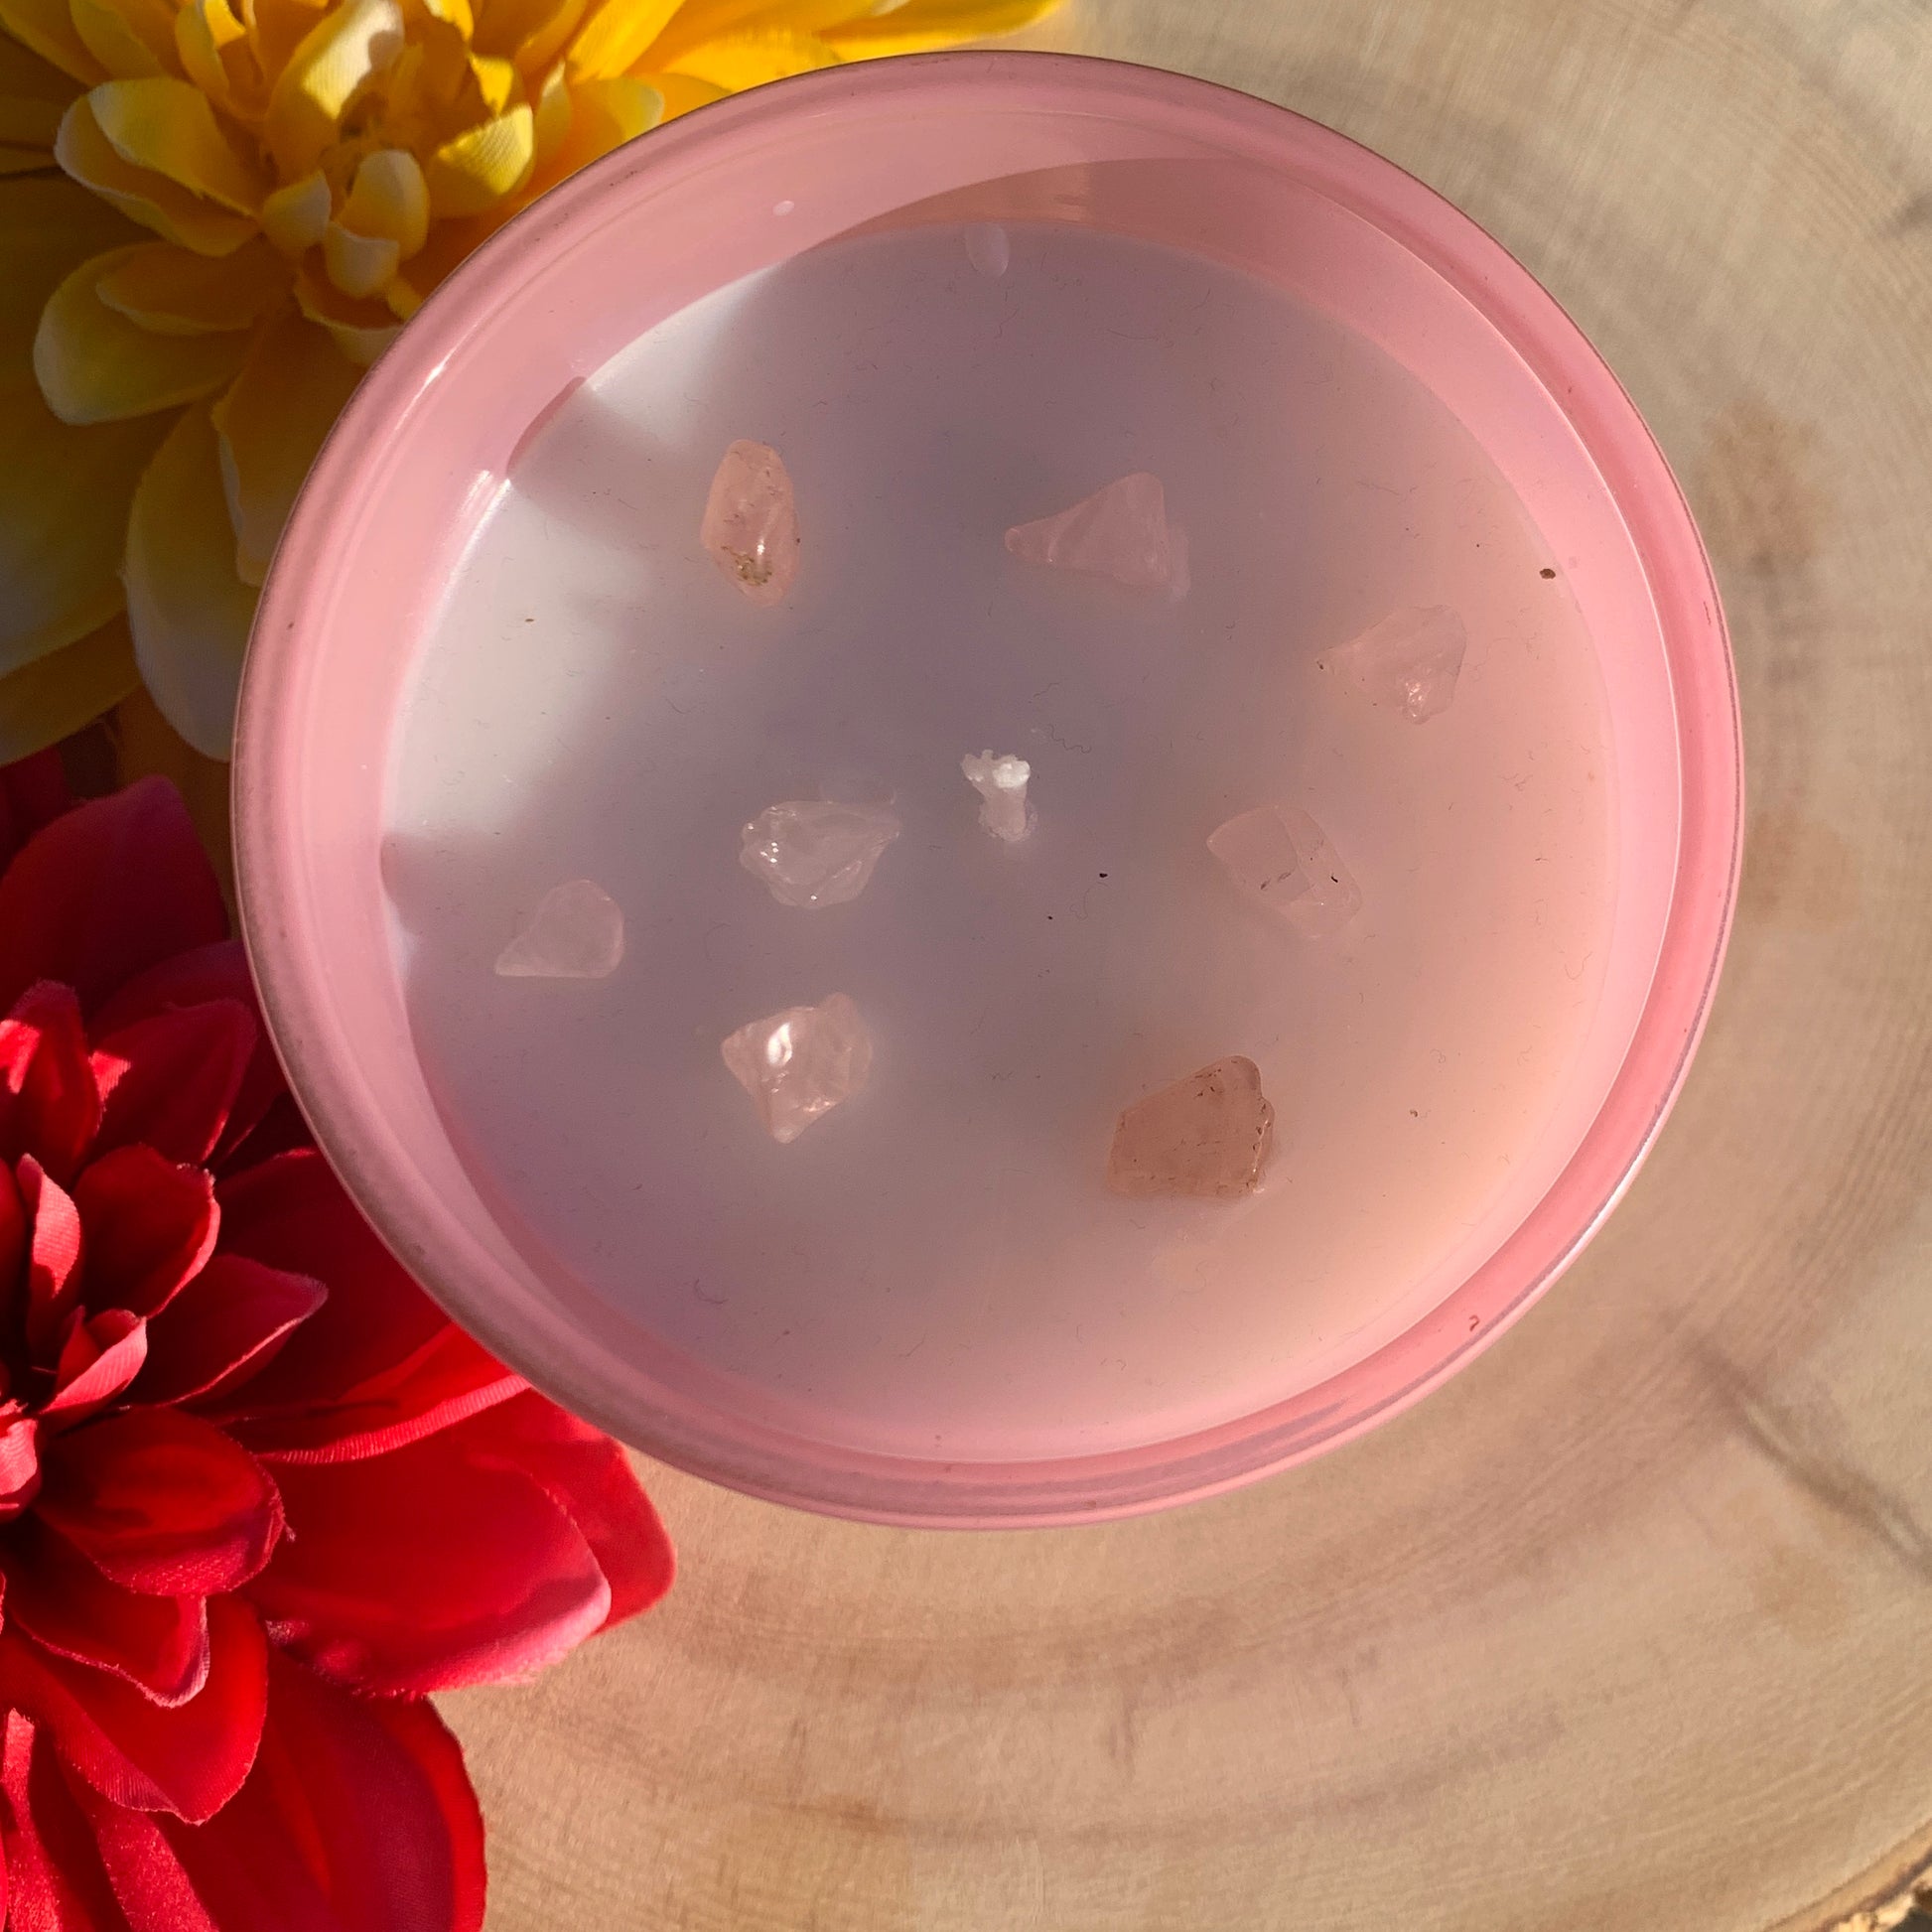 🕯️This photo shows the blush-colored jar representing compassion, romance and femininity containing rose quartz, known as the stone of unconditional love that opens up the heart to increased affection, closeness, healing and self-love.🕯️